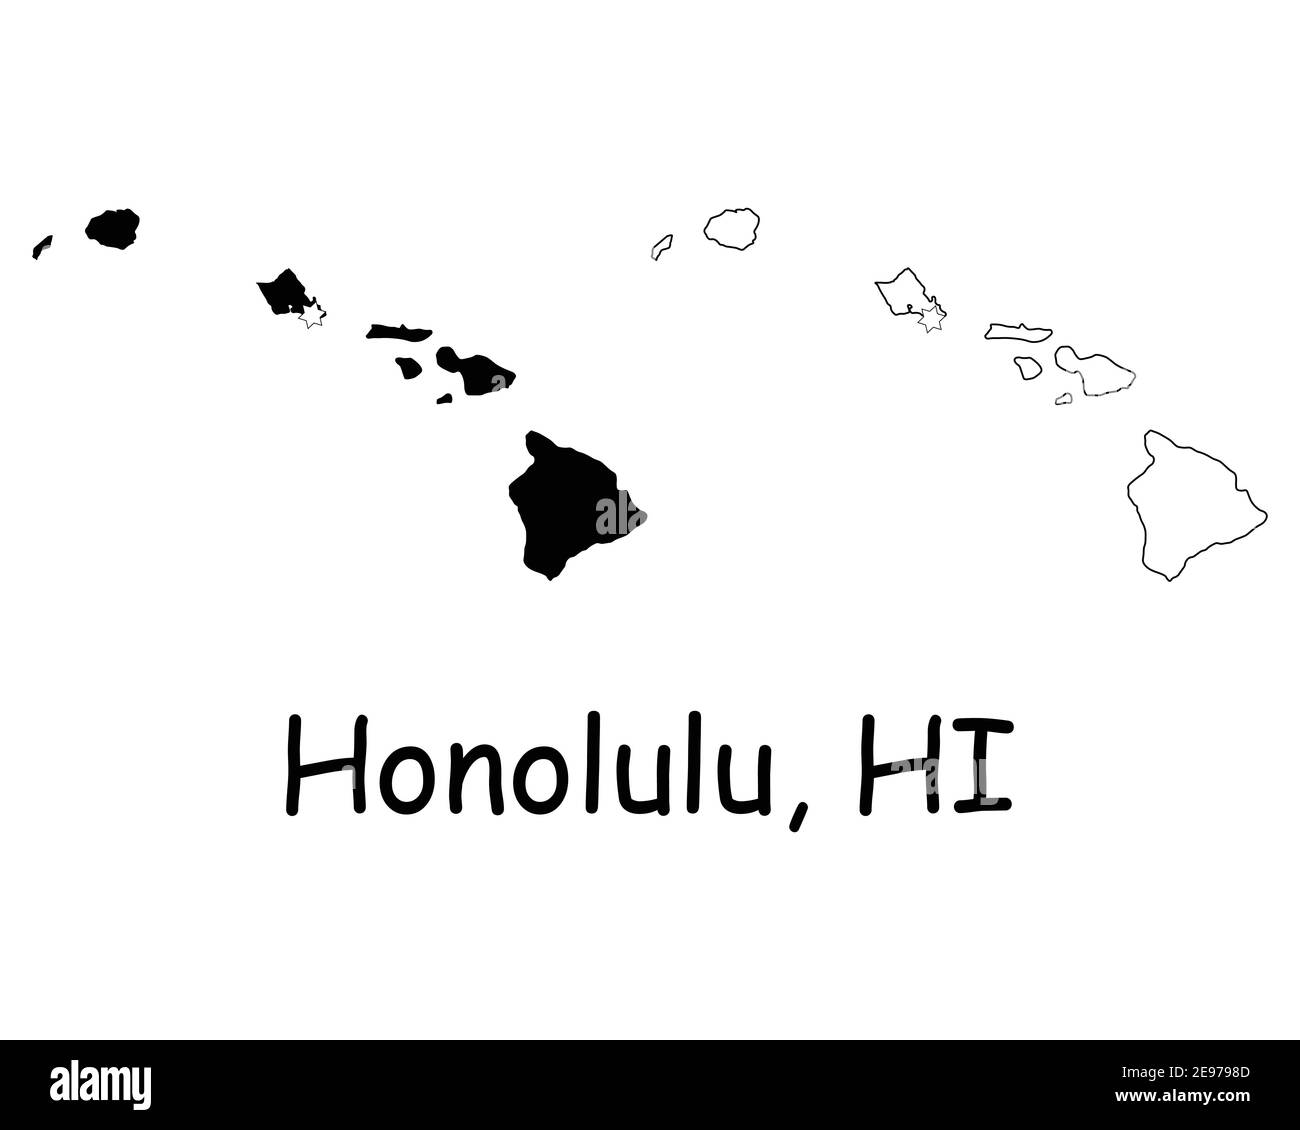 Hawaii HI state Maps USA with Capital City Star at Honolulu. Black silhouette and outline isolated on a white background. EPS Vector Stock Vector